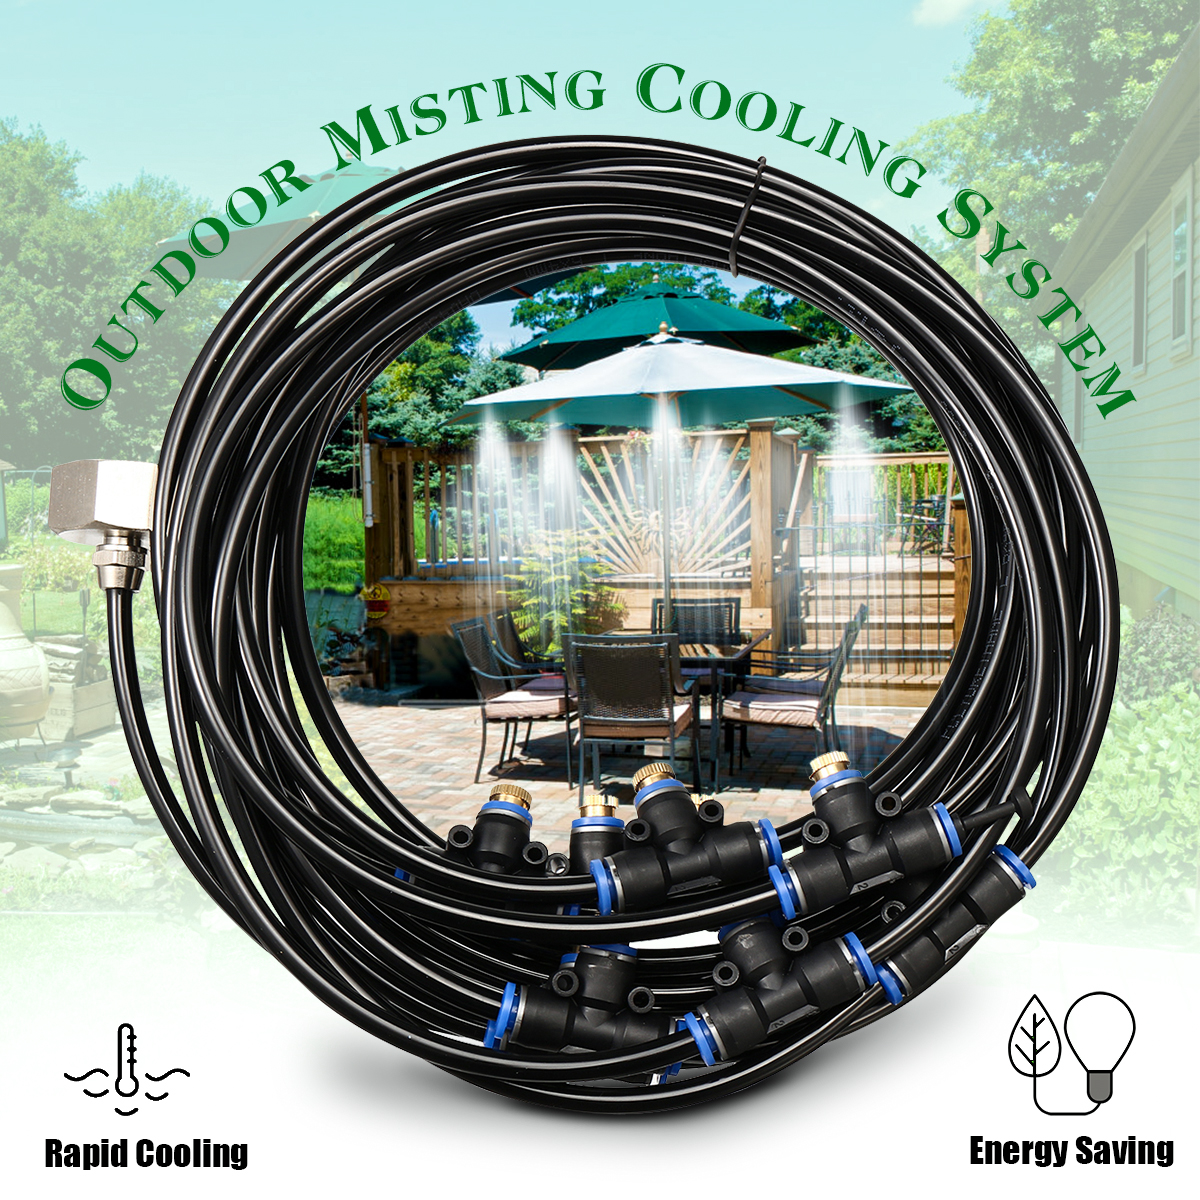 Misting-System-Fan-Cooler-Water-Cooling-Patio-Mist-Garden-Sprayer-Tool-With-Nozzles-Splitter-1591731-3